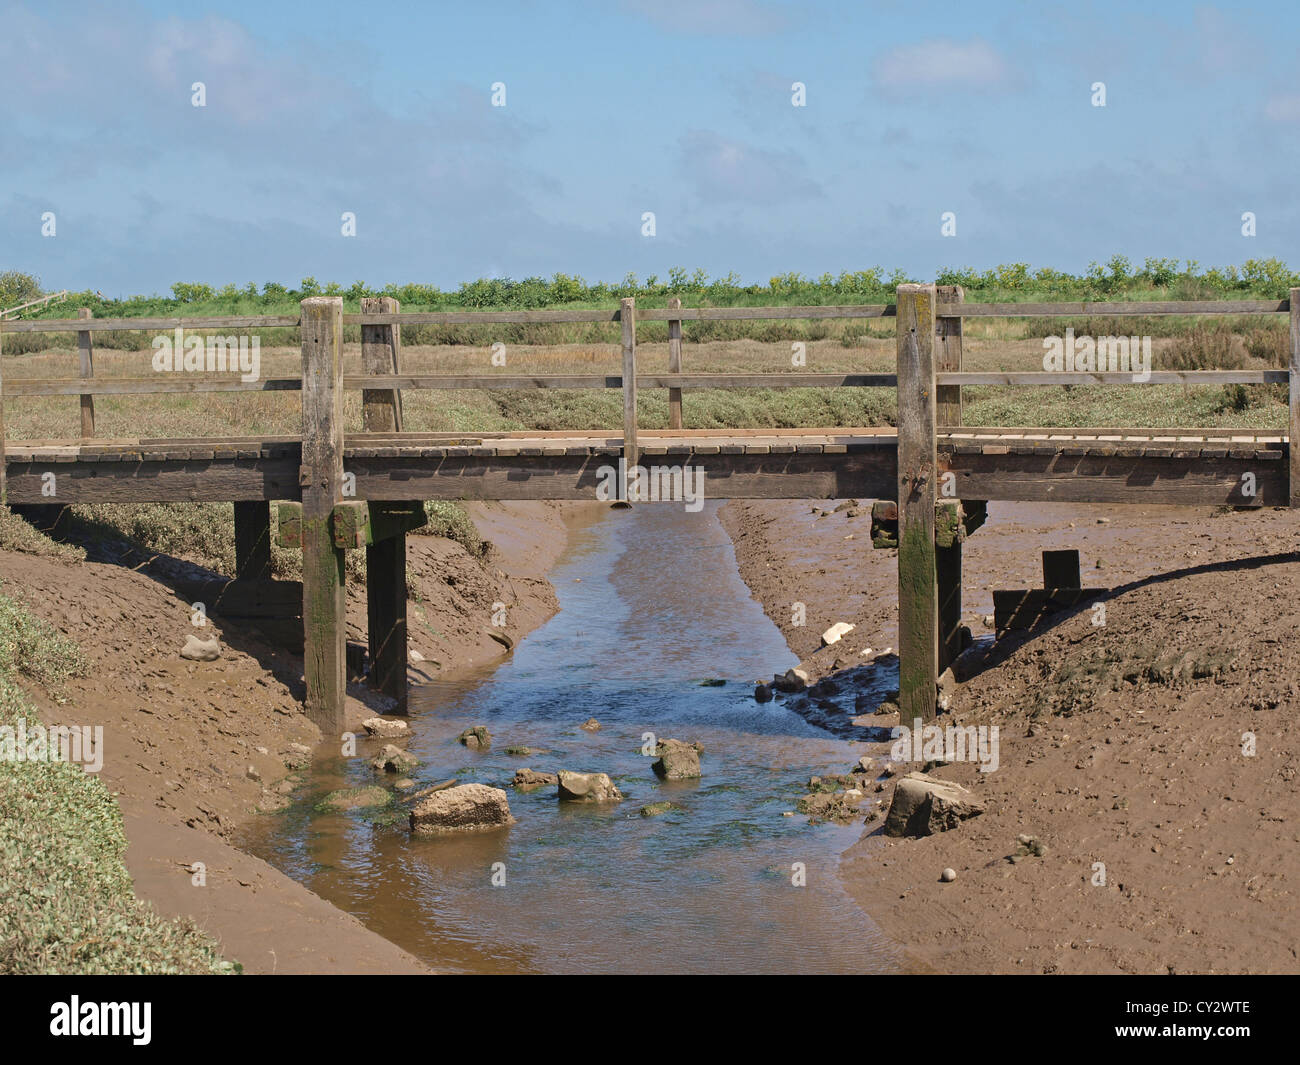 The low tide under this old wooden bridge on the salt marshes at Blakeney has exposed a maze of channels and mudflats. Stock Photo